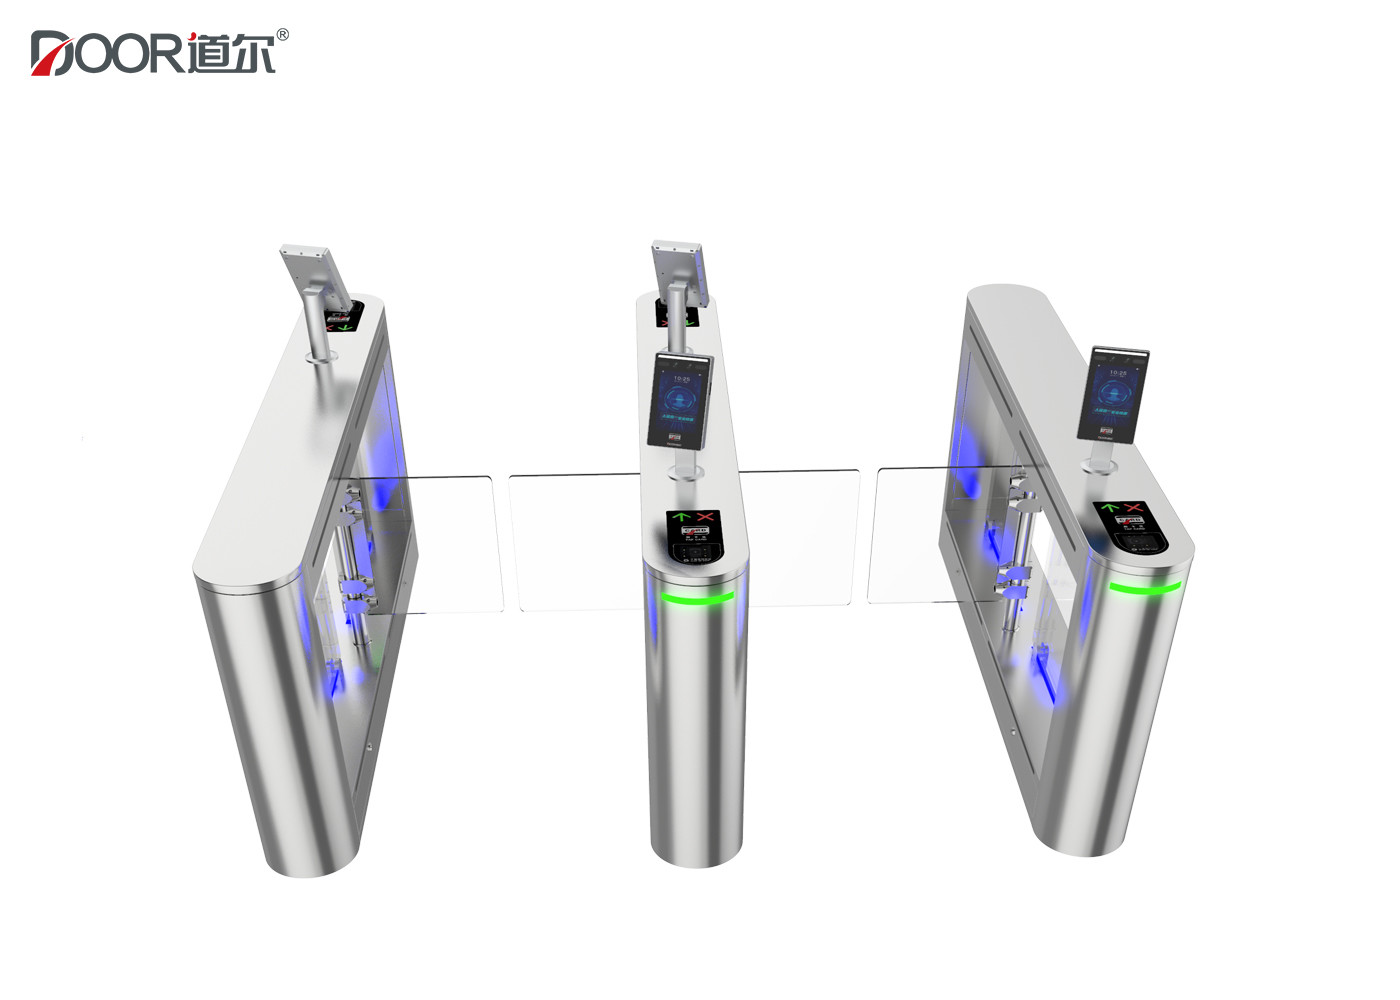 Waterproof Outdoor Facial Recognition Turnstile 304/316 Stainless Steel Material